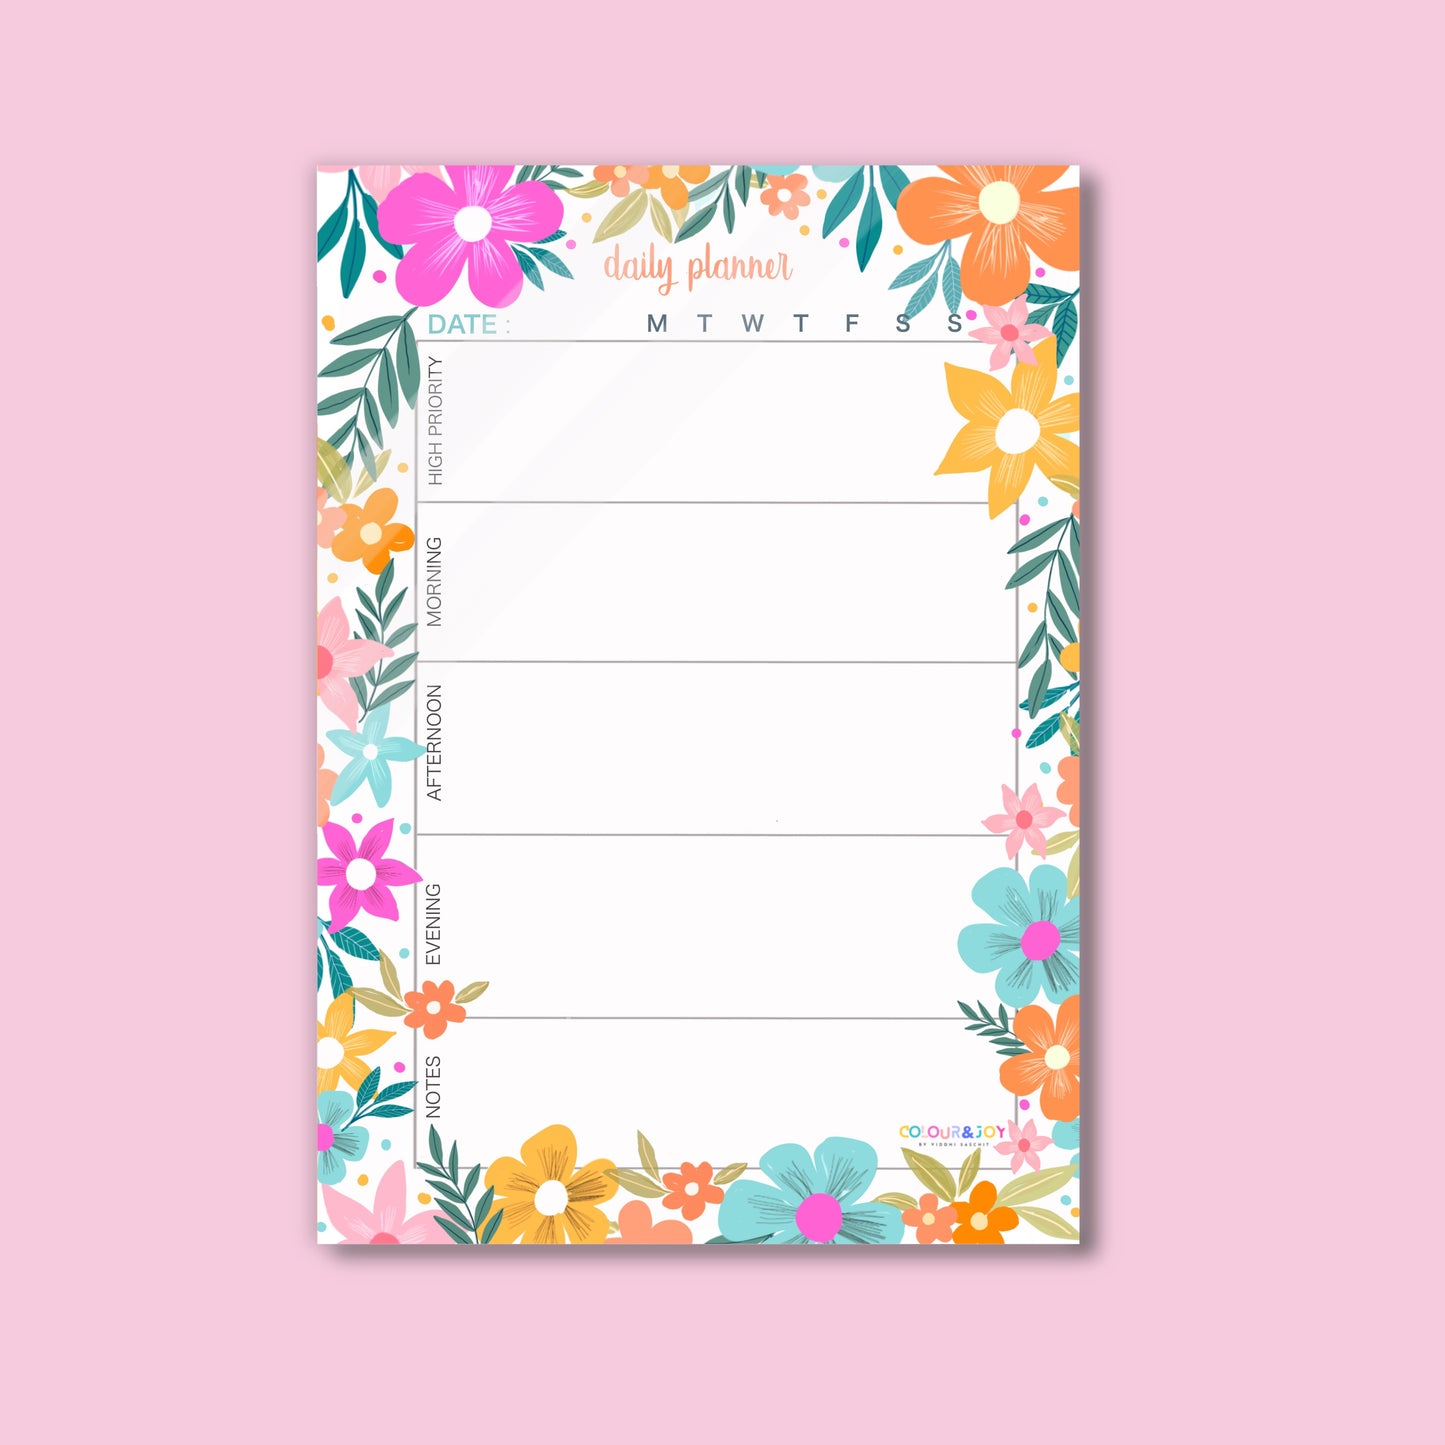 DAILY PLANNER - A4 (8.3"x11.7")